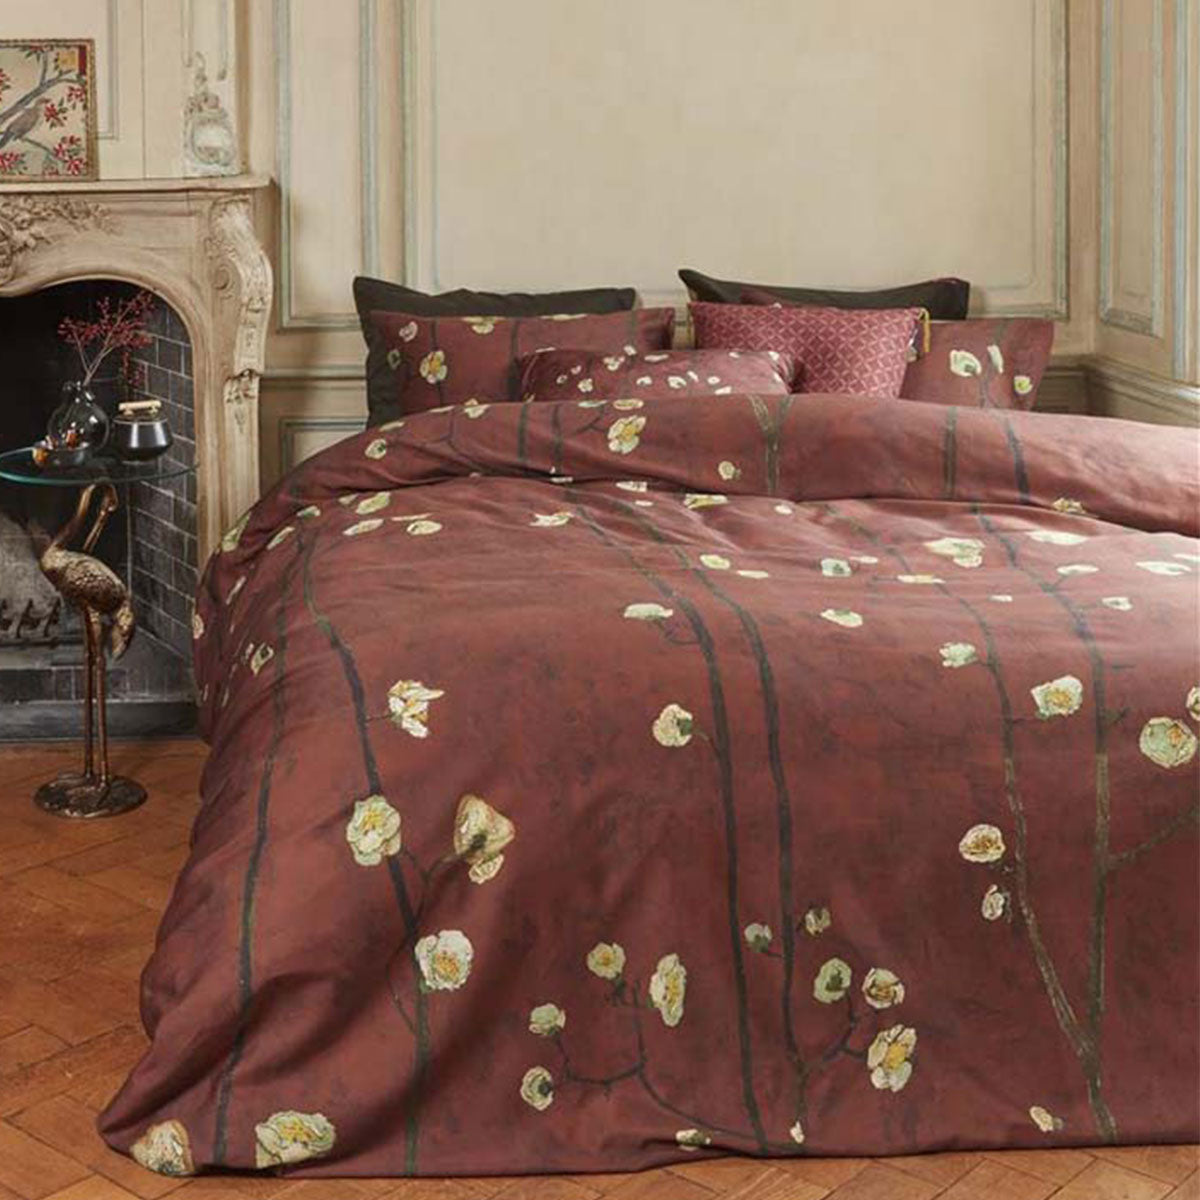 Van Gogh Plum Blossoms Red Cotton Sateen Quilt Cover Set King